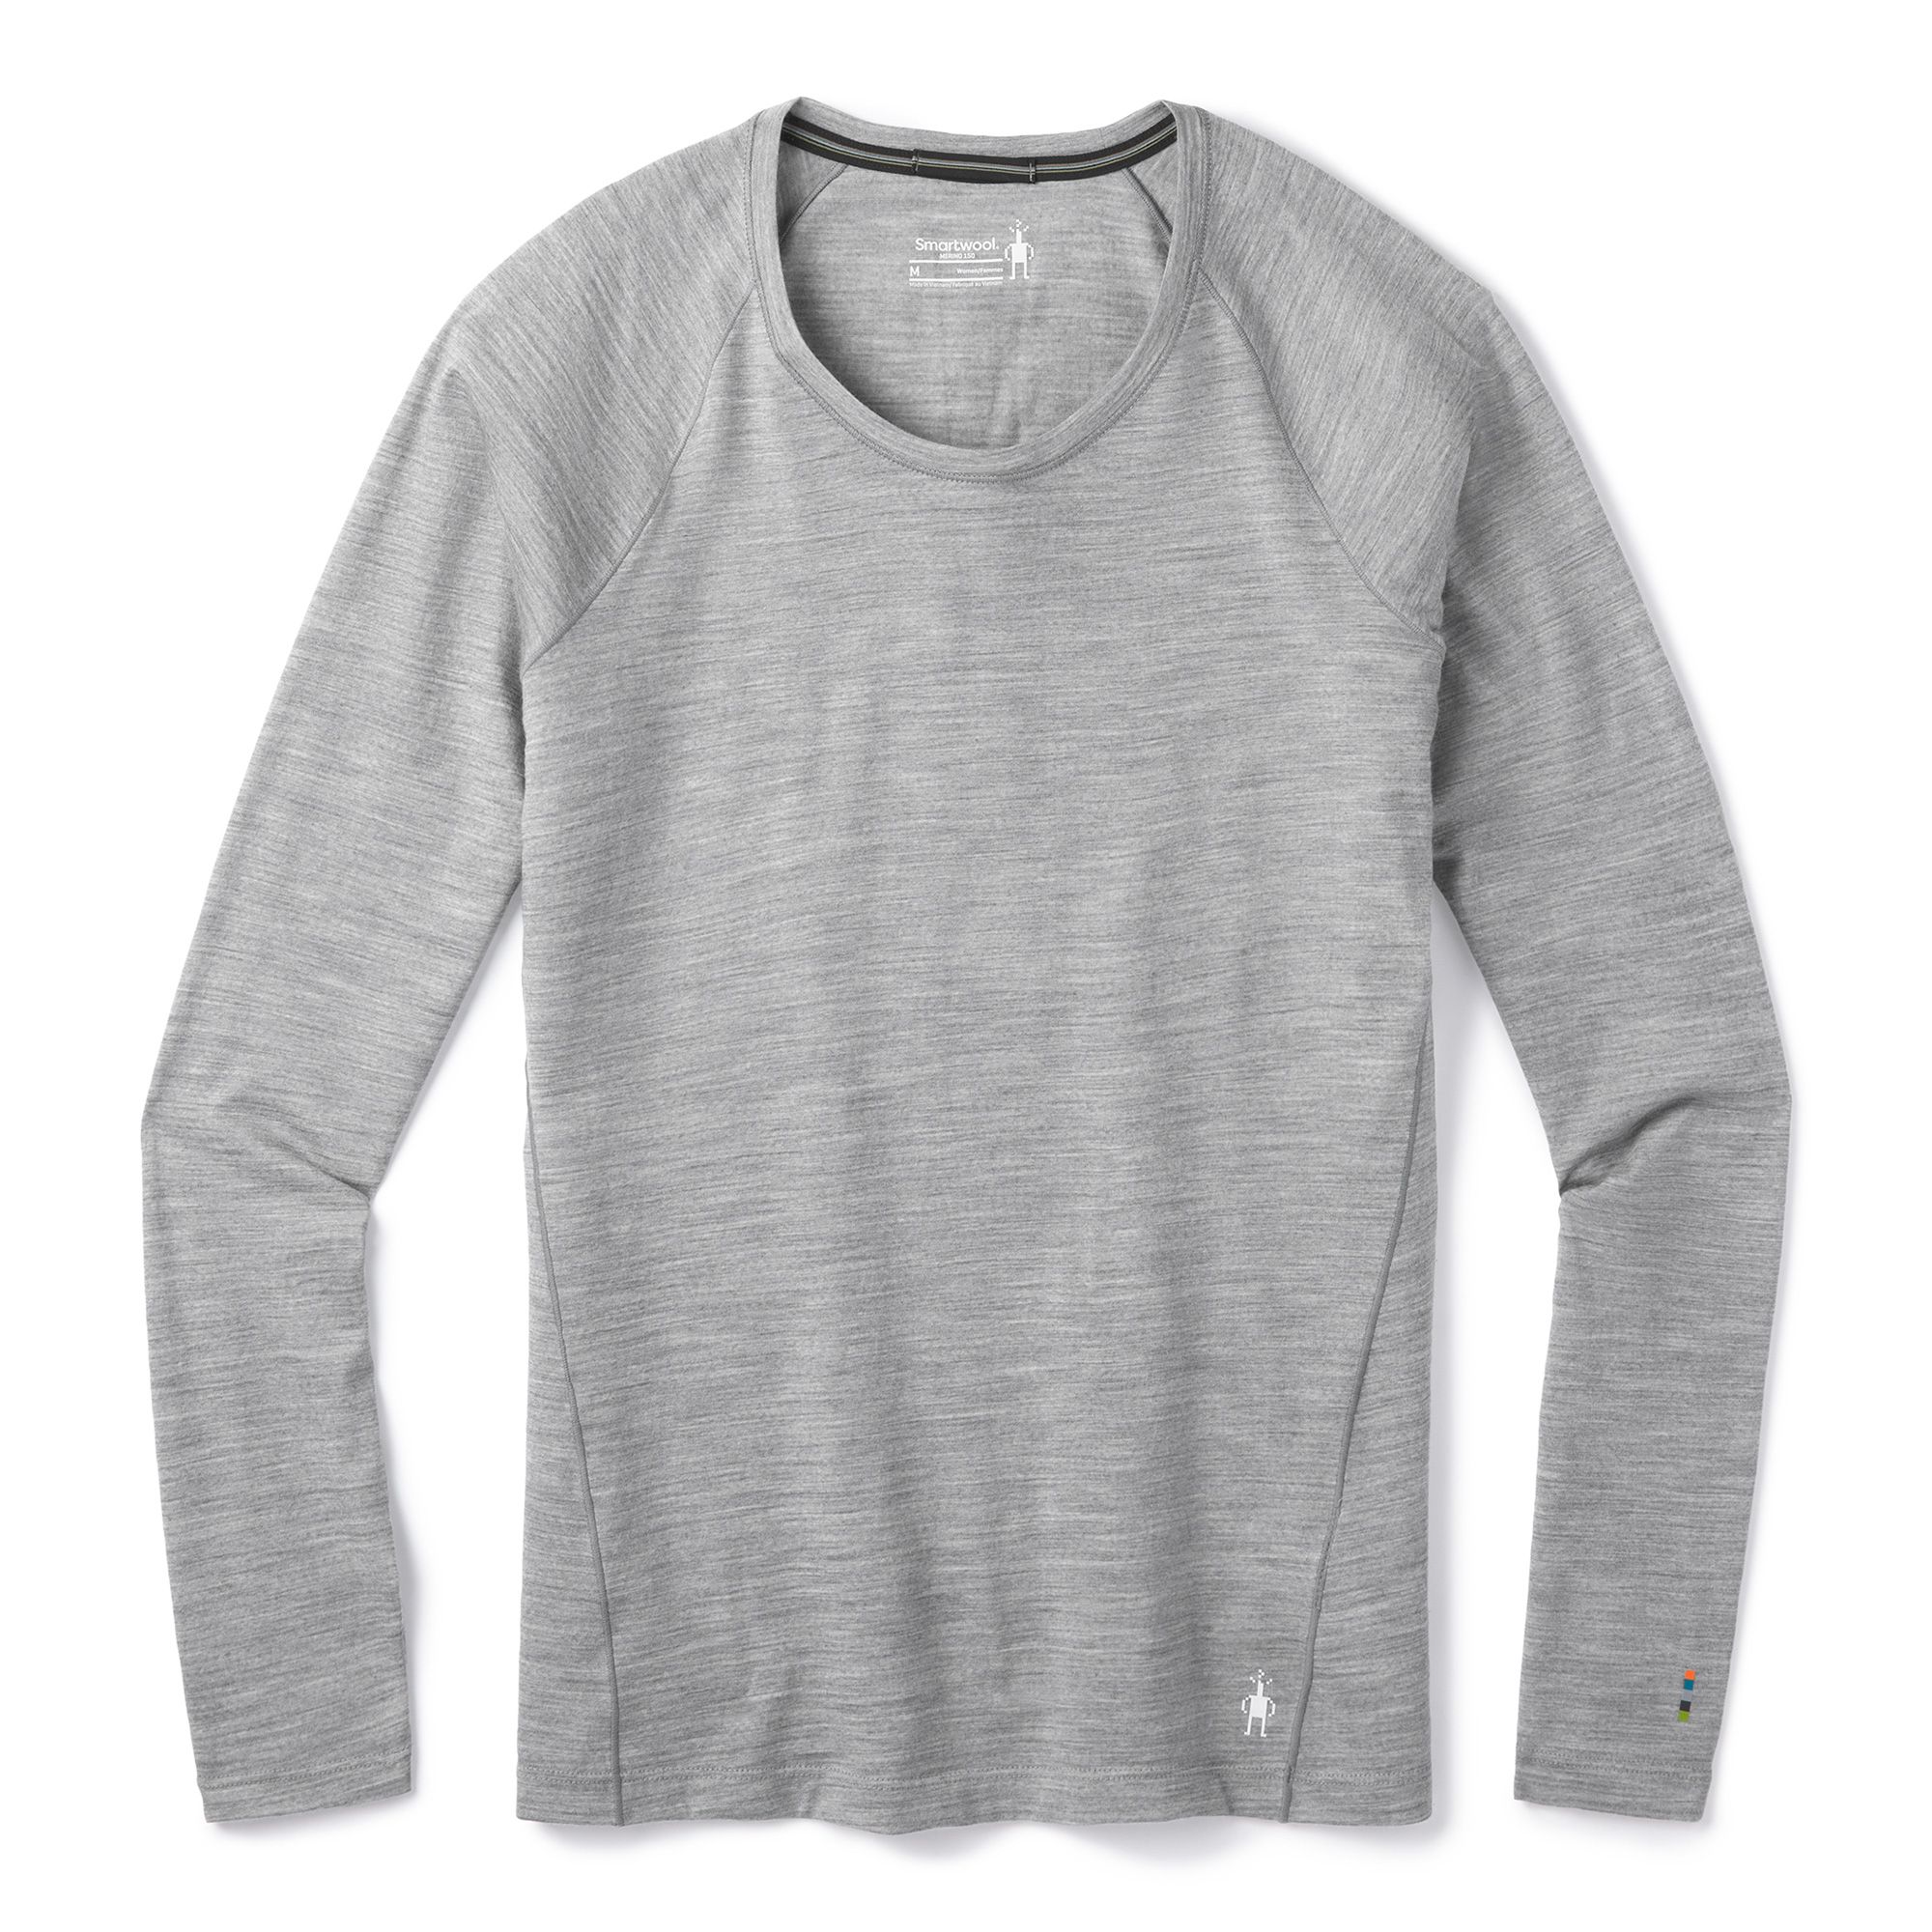  Smartwool SW000748545S Men's Merino 150 Baselayer Long Sleeve  Light Gray Heather S : Clothing, Shoes & Jewelry